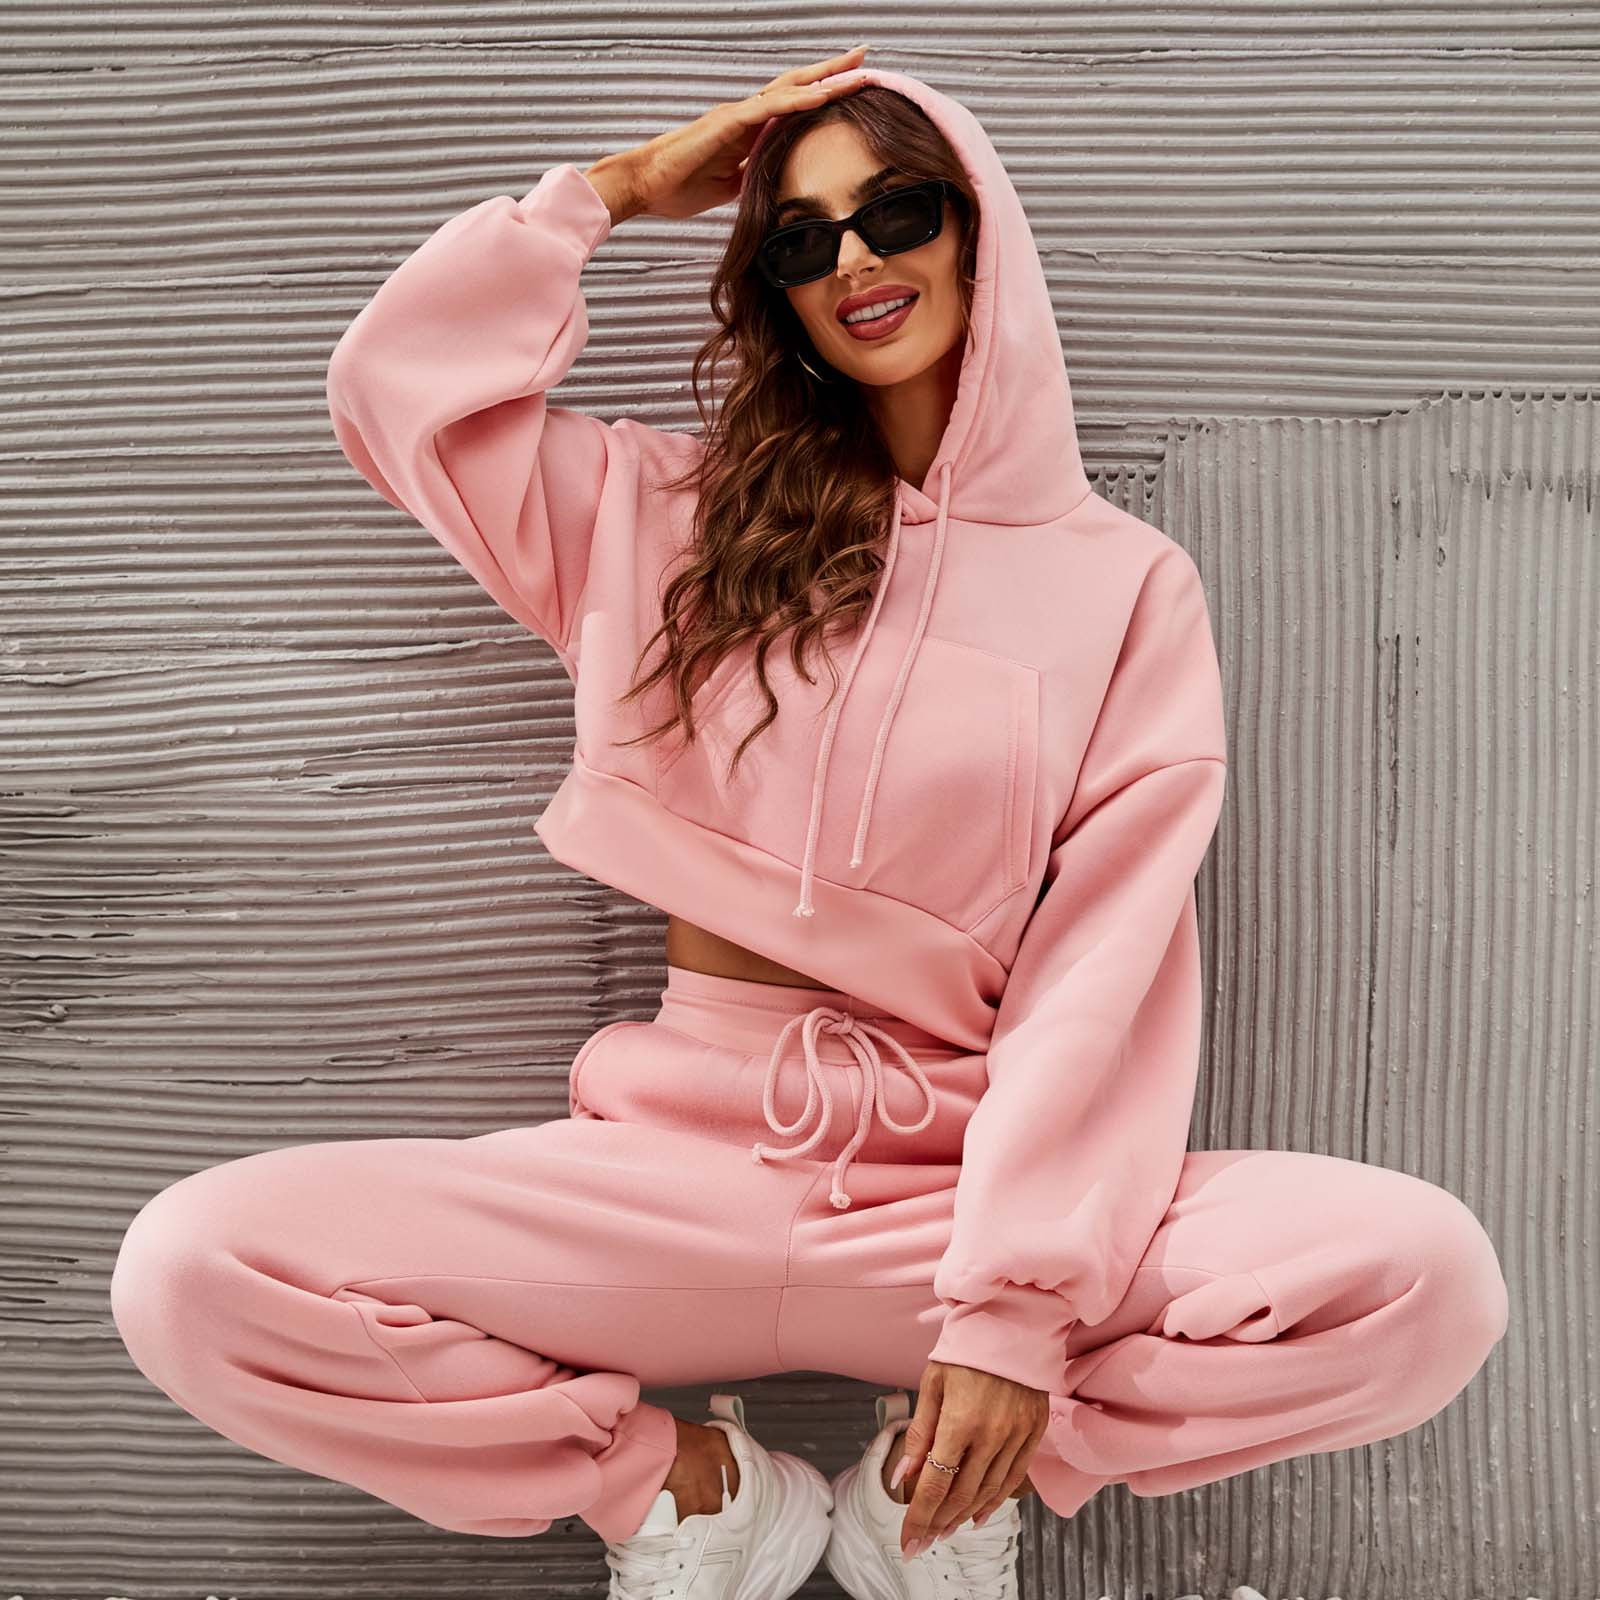 Hfyihgf 2 Piece Sweatsuit Outfits for Women Long Sleeve Cropped Hoodies  Sweatshirt Casual Sweatpants Tracksuit Lounge Set with Pockets(Pink,L) 